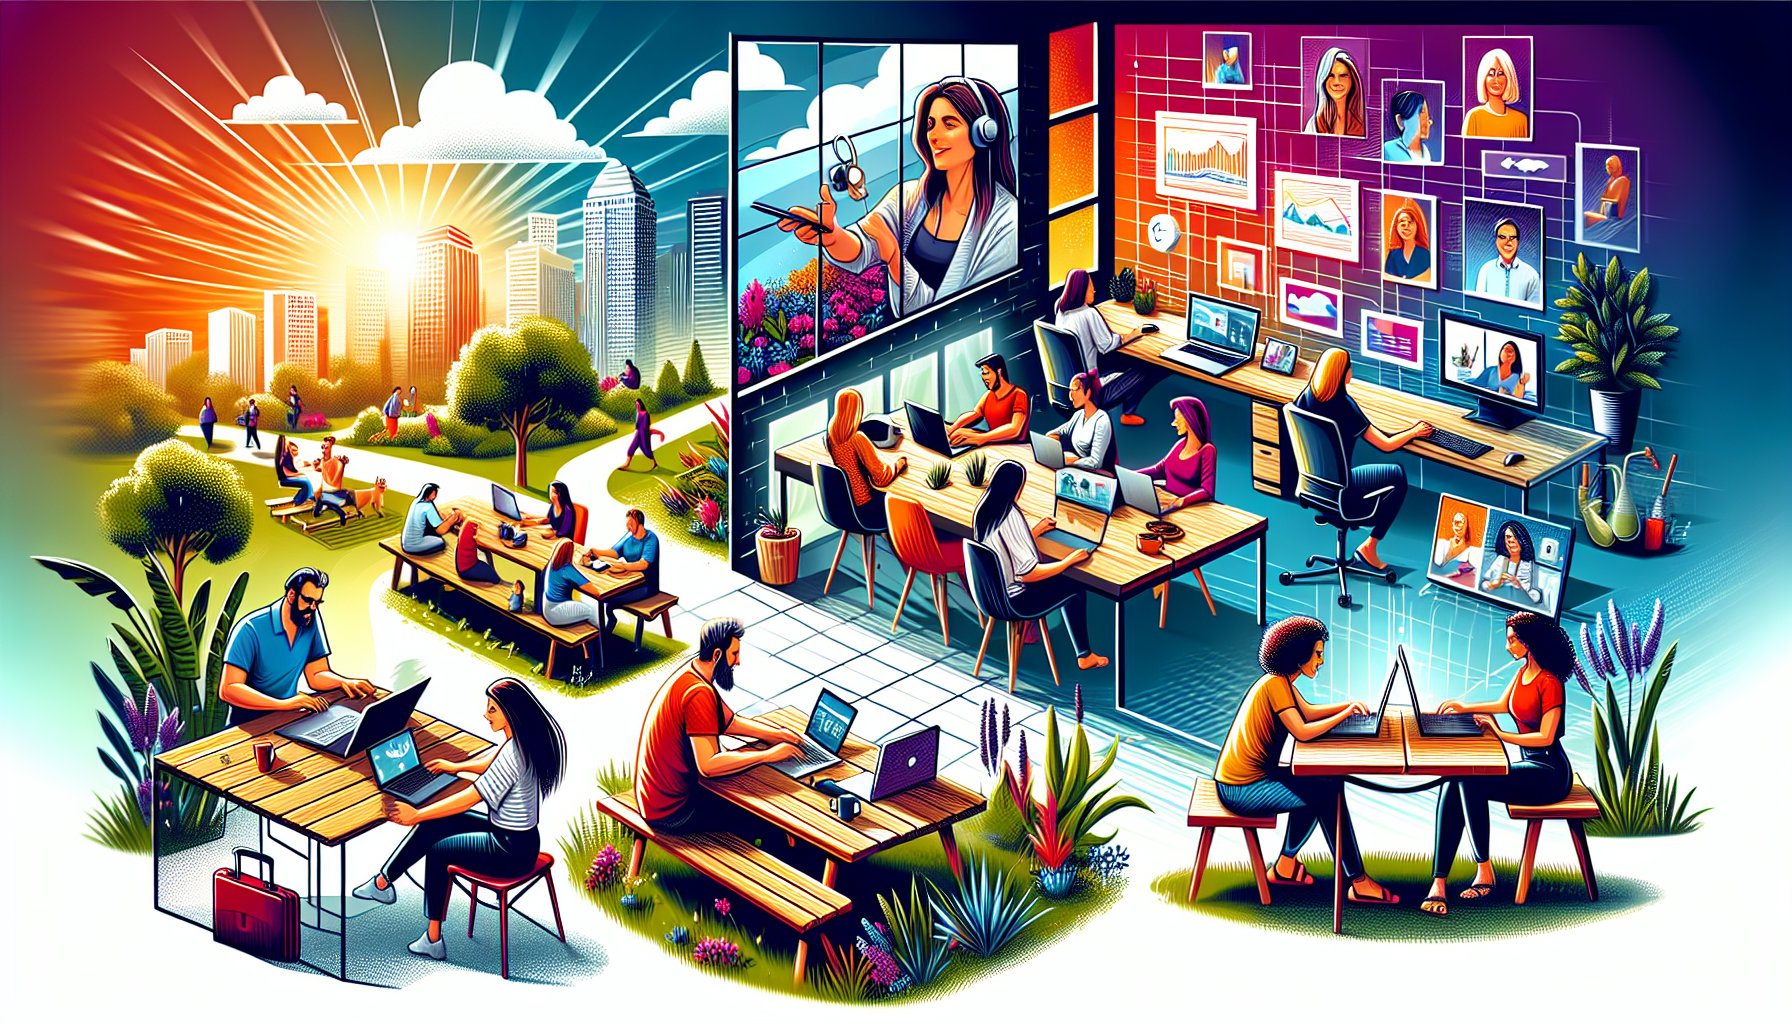 Illustration of employees with flexible work arrangements in a productive environment